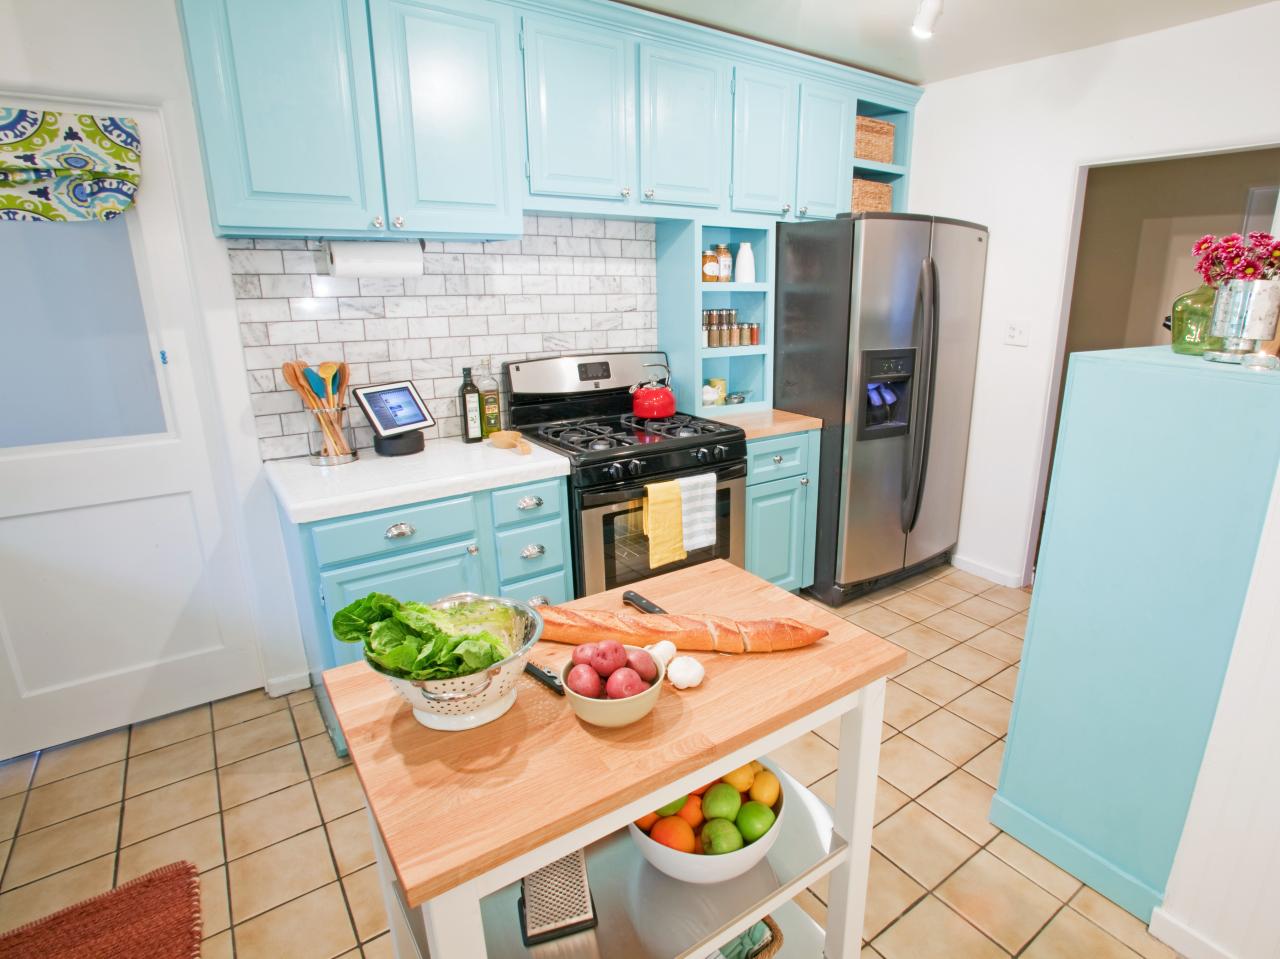 A kitchen with blue cabinets and a wooden cutting board.